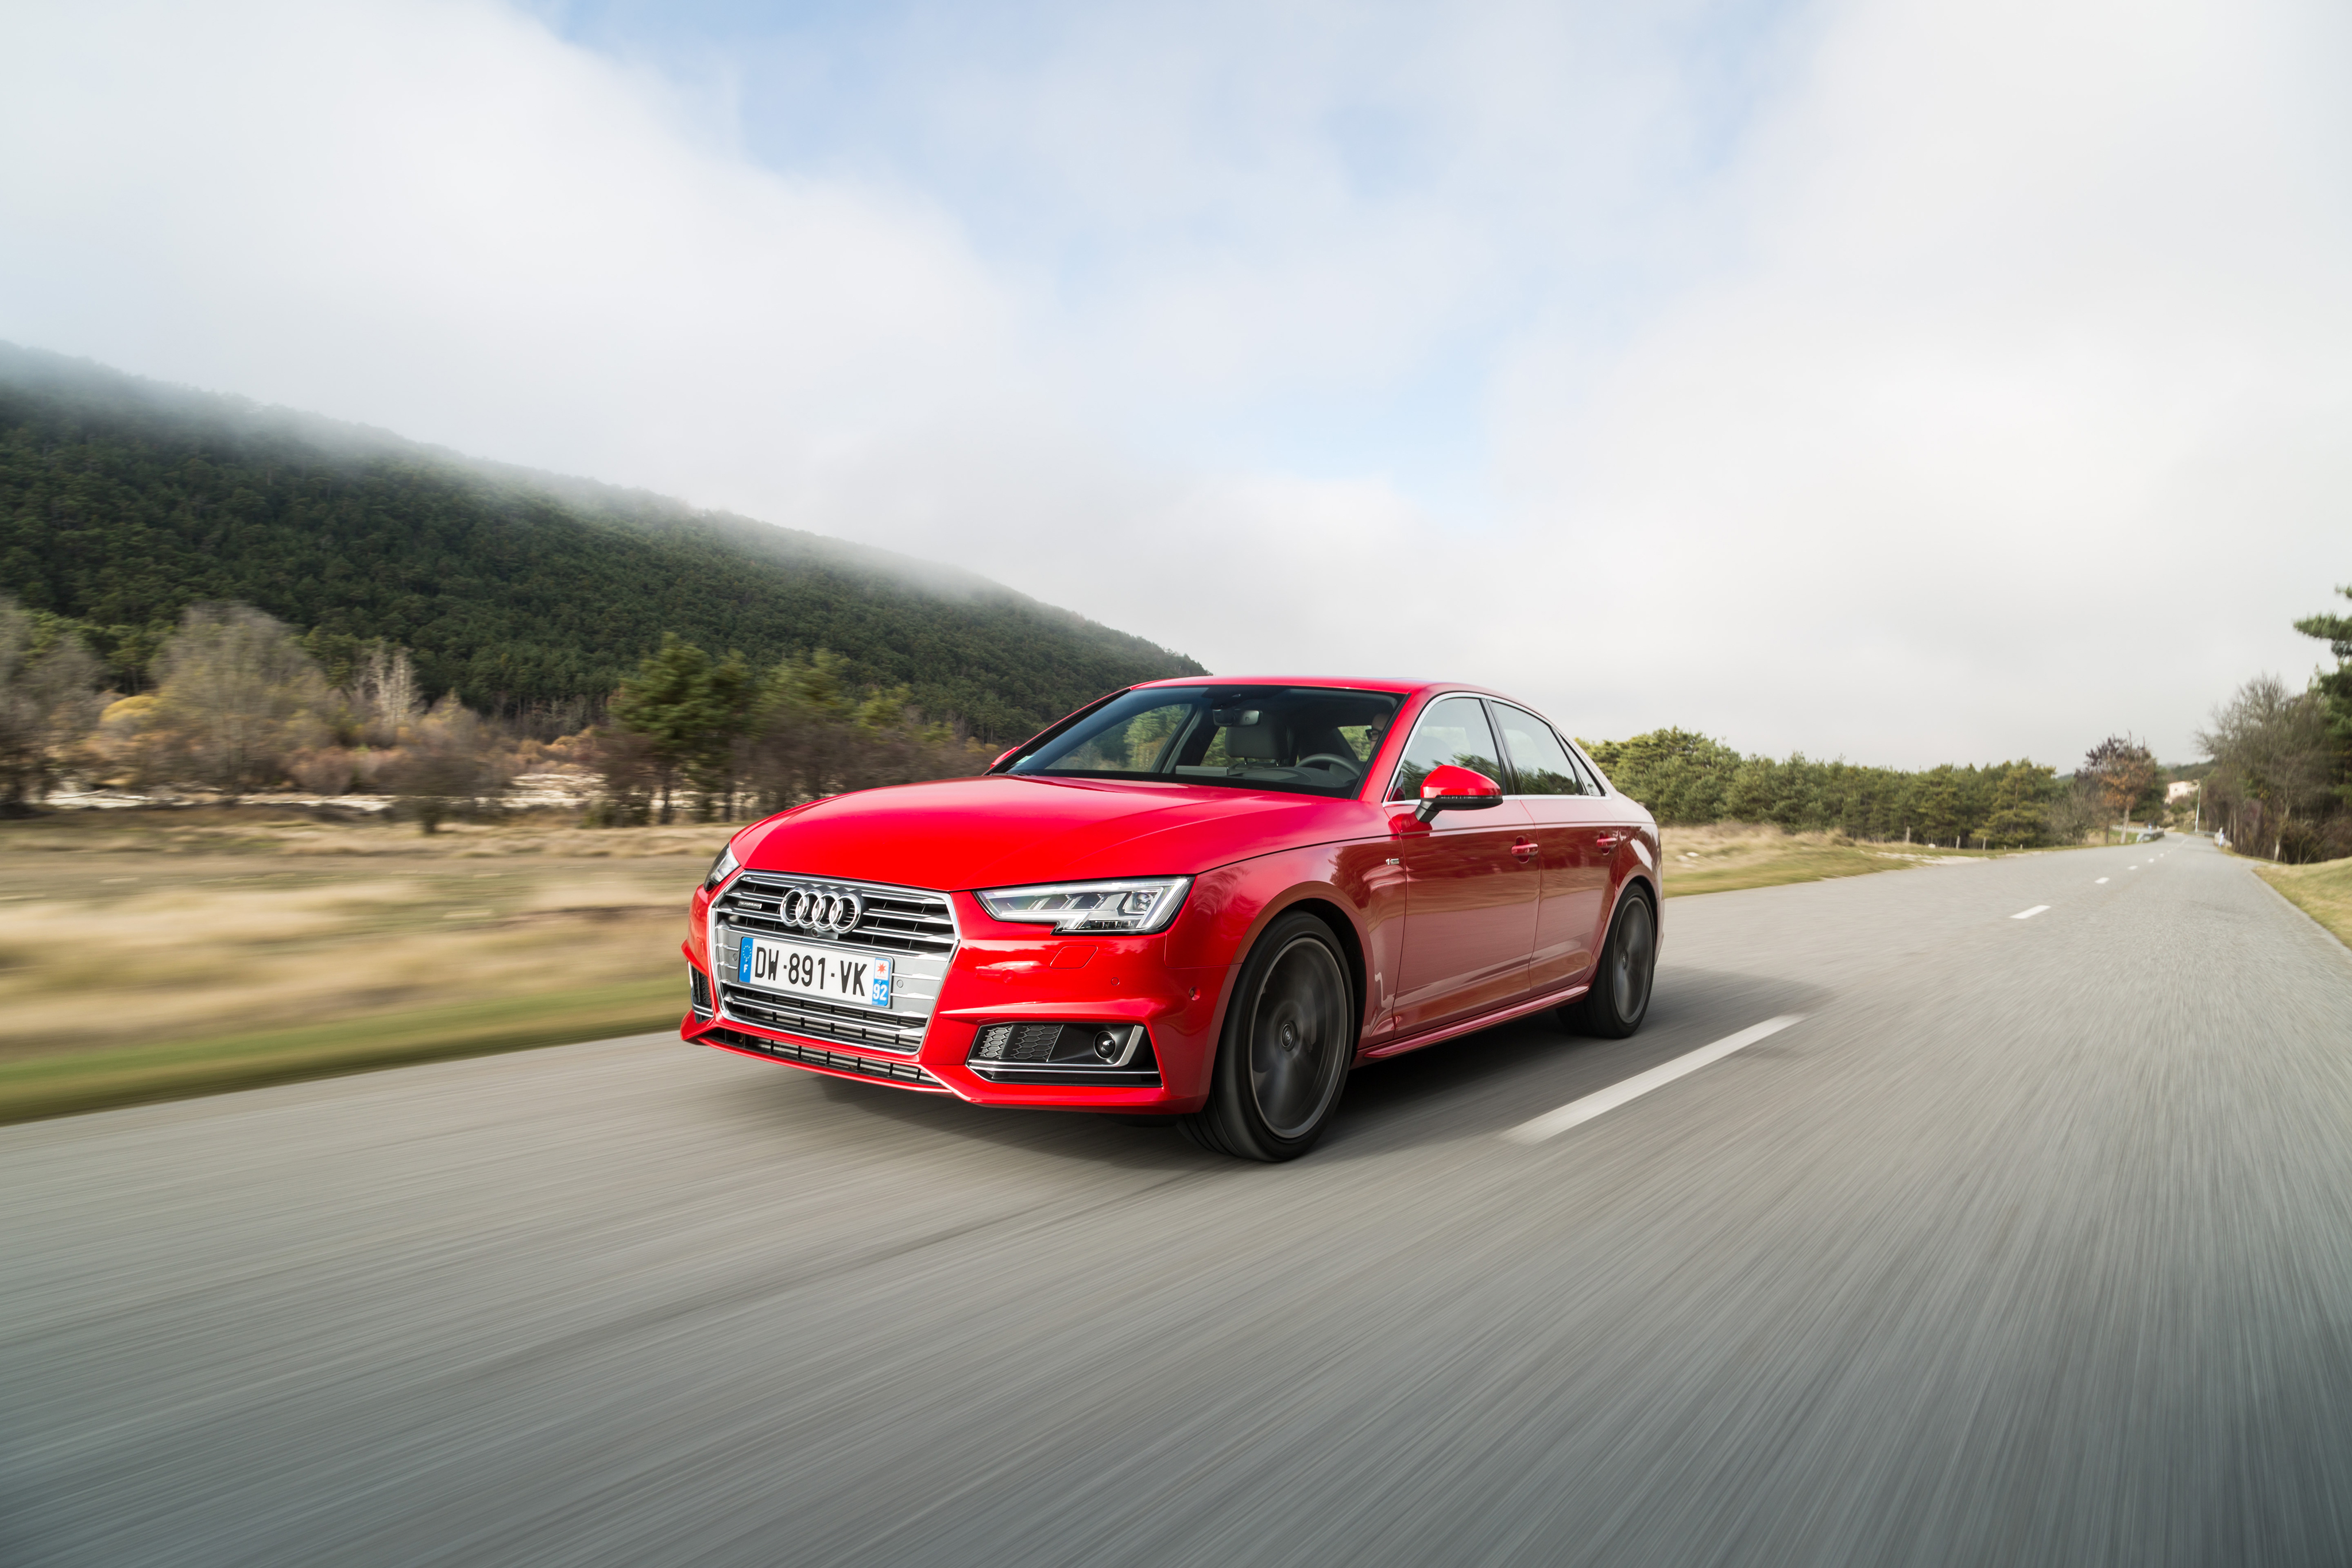 Free photo Wallpaper with red audi a4 quattro on the road